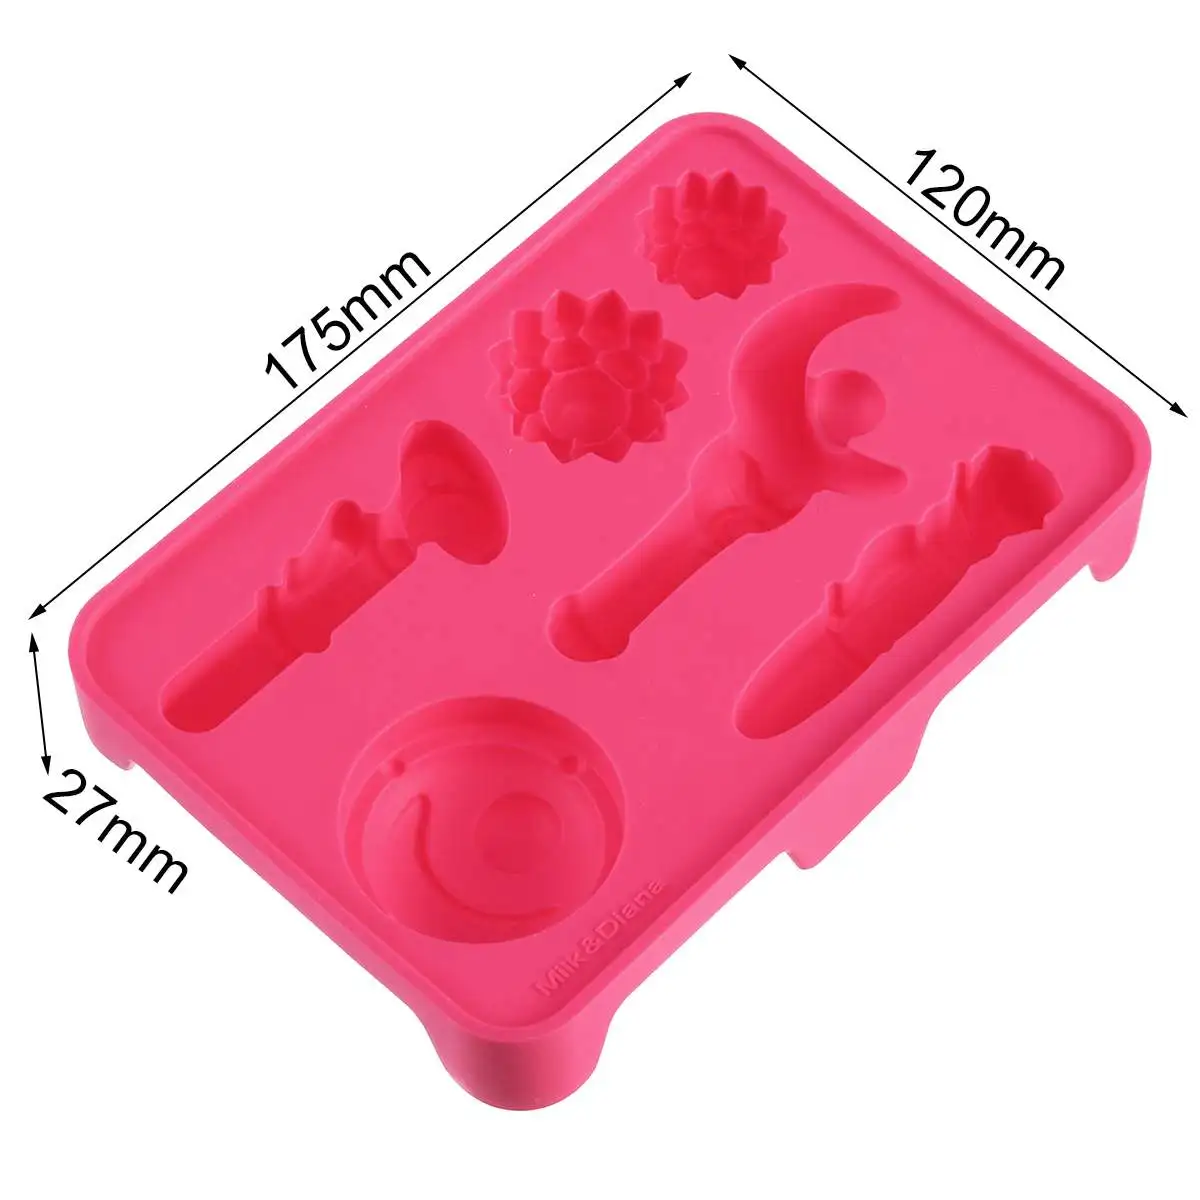 sailor moon Stick Ice Cube Tray Great Mold for Chocolate Candy Jello and Soap